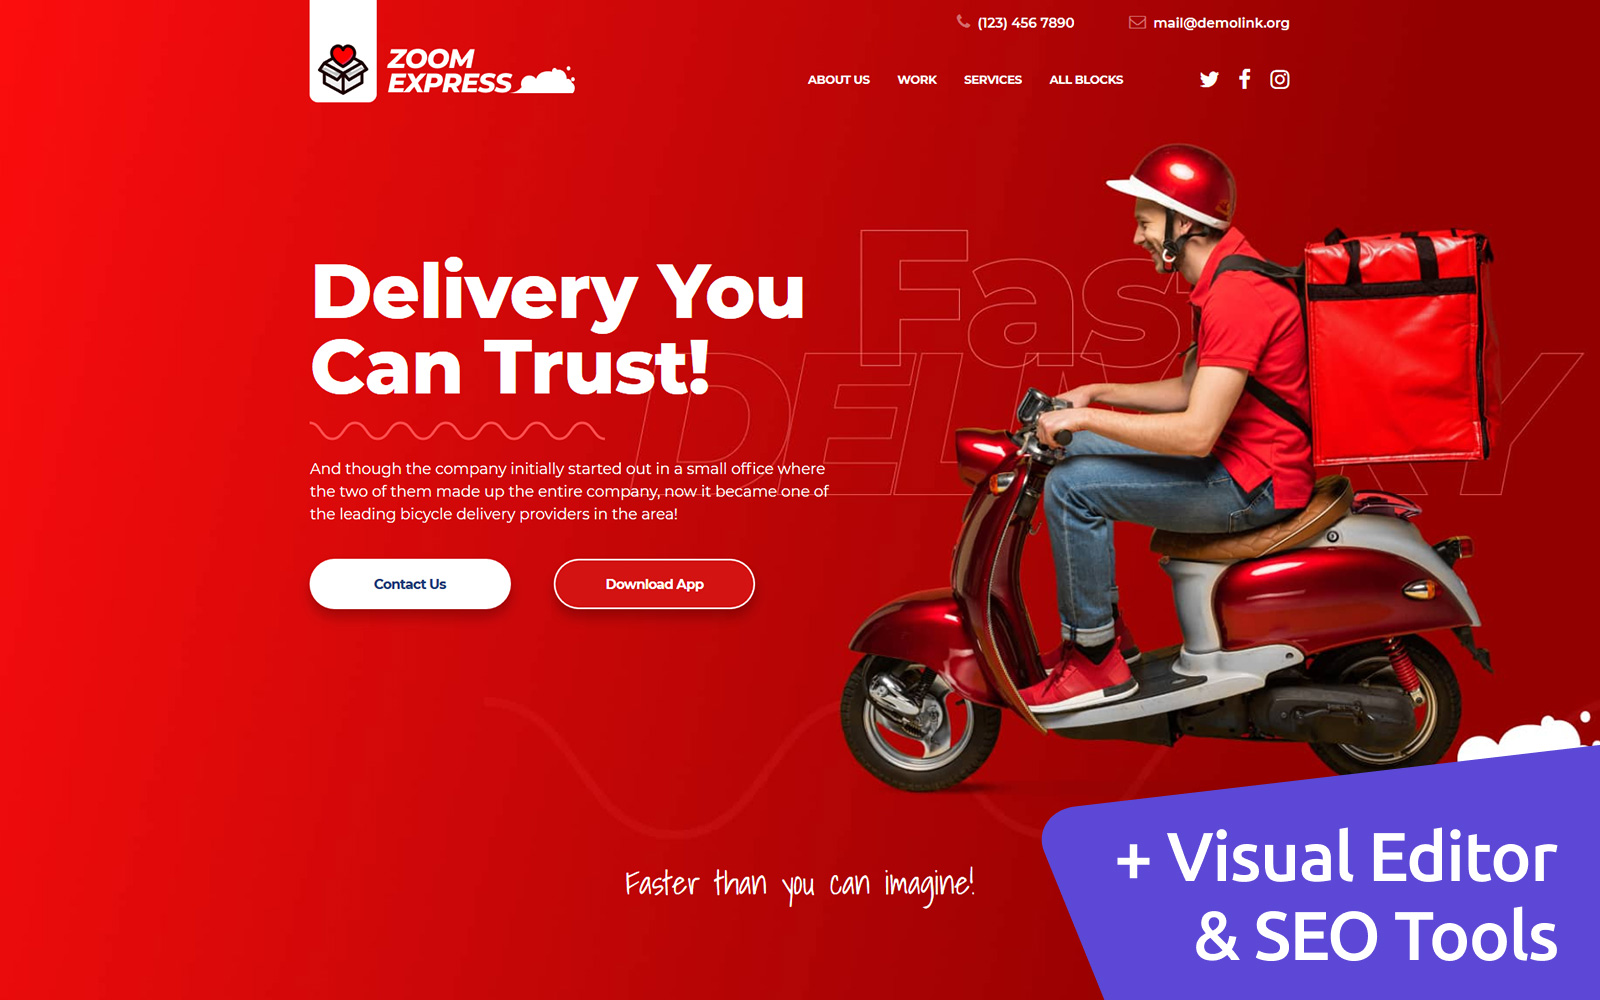 Zoom Express - Delivery Company MotoCMS Landing Page Website Template - Striking Red Color Theme